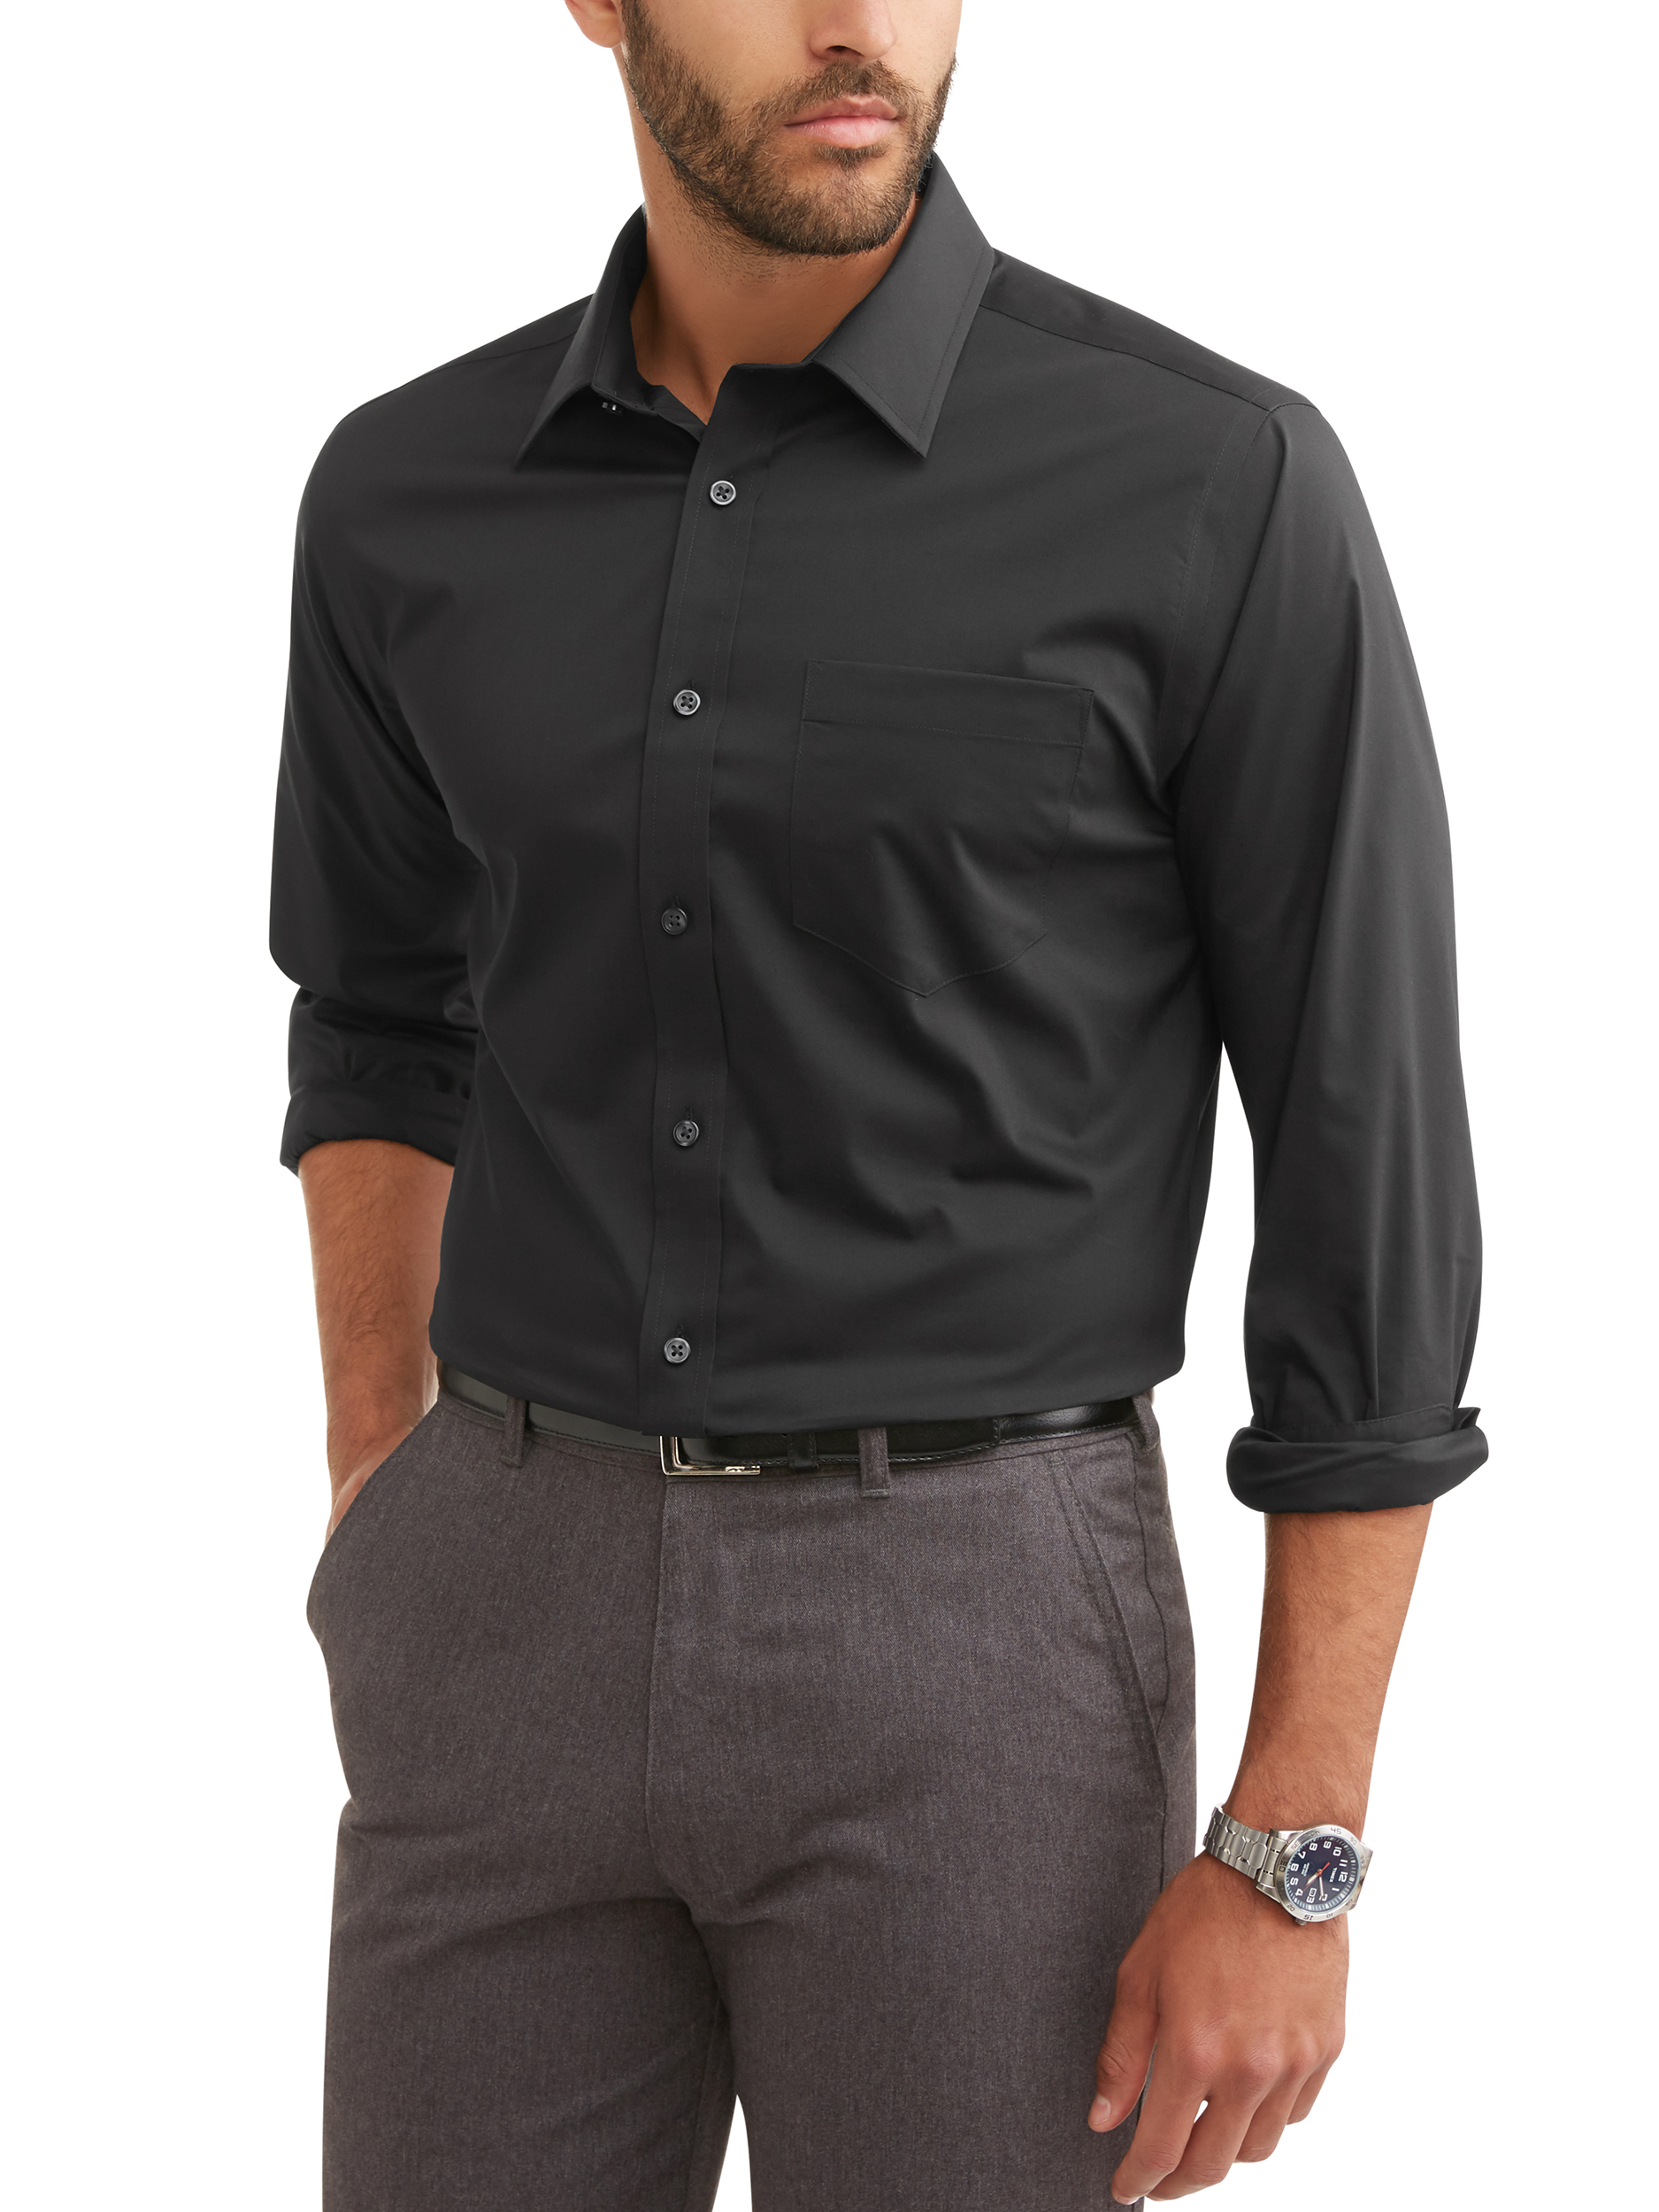 George Men's Long Sleeve Performance Slim Fit Dress Shirt, Up to 3XL - image 5 of 5